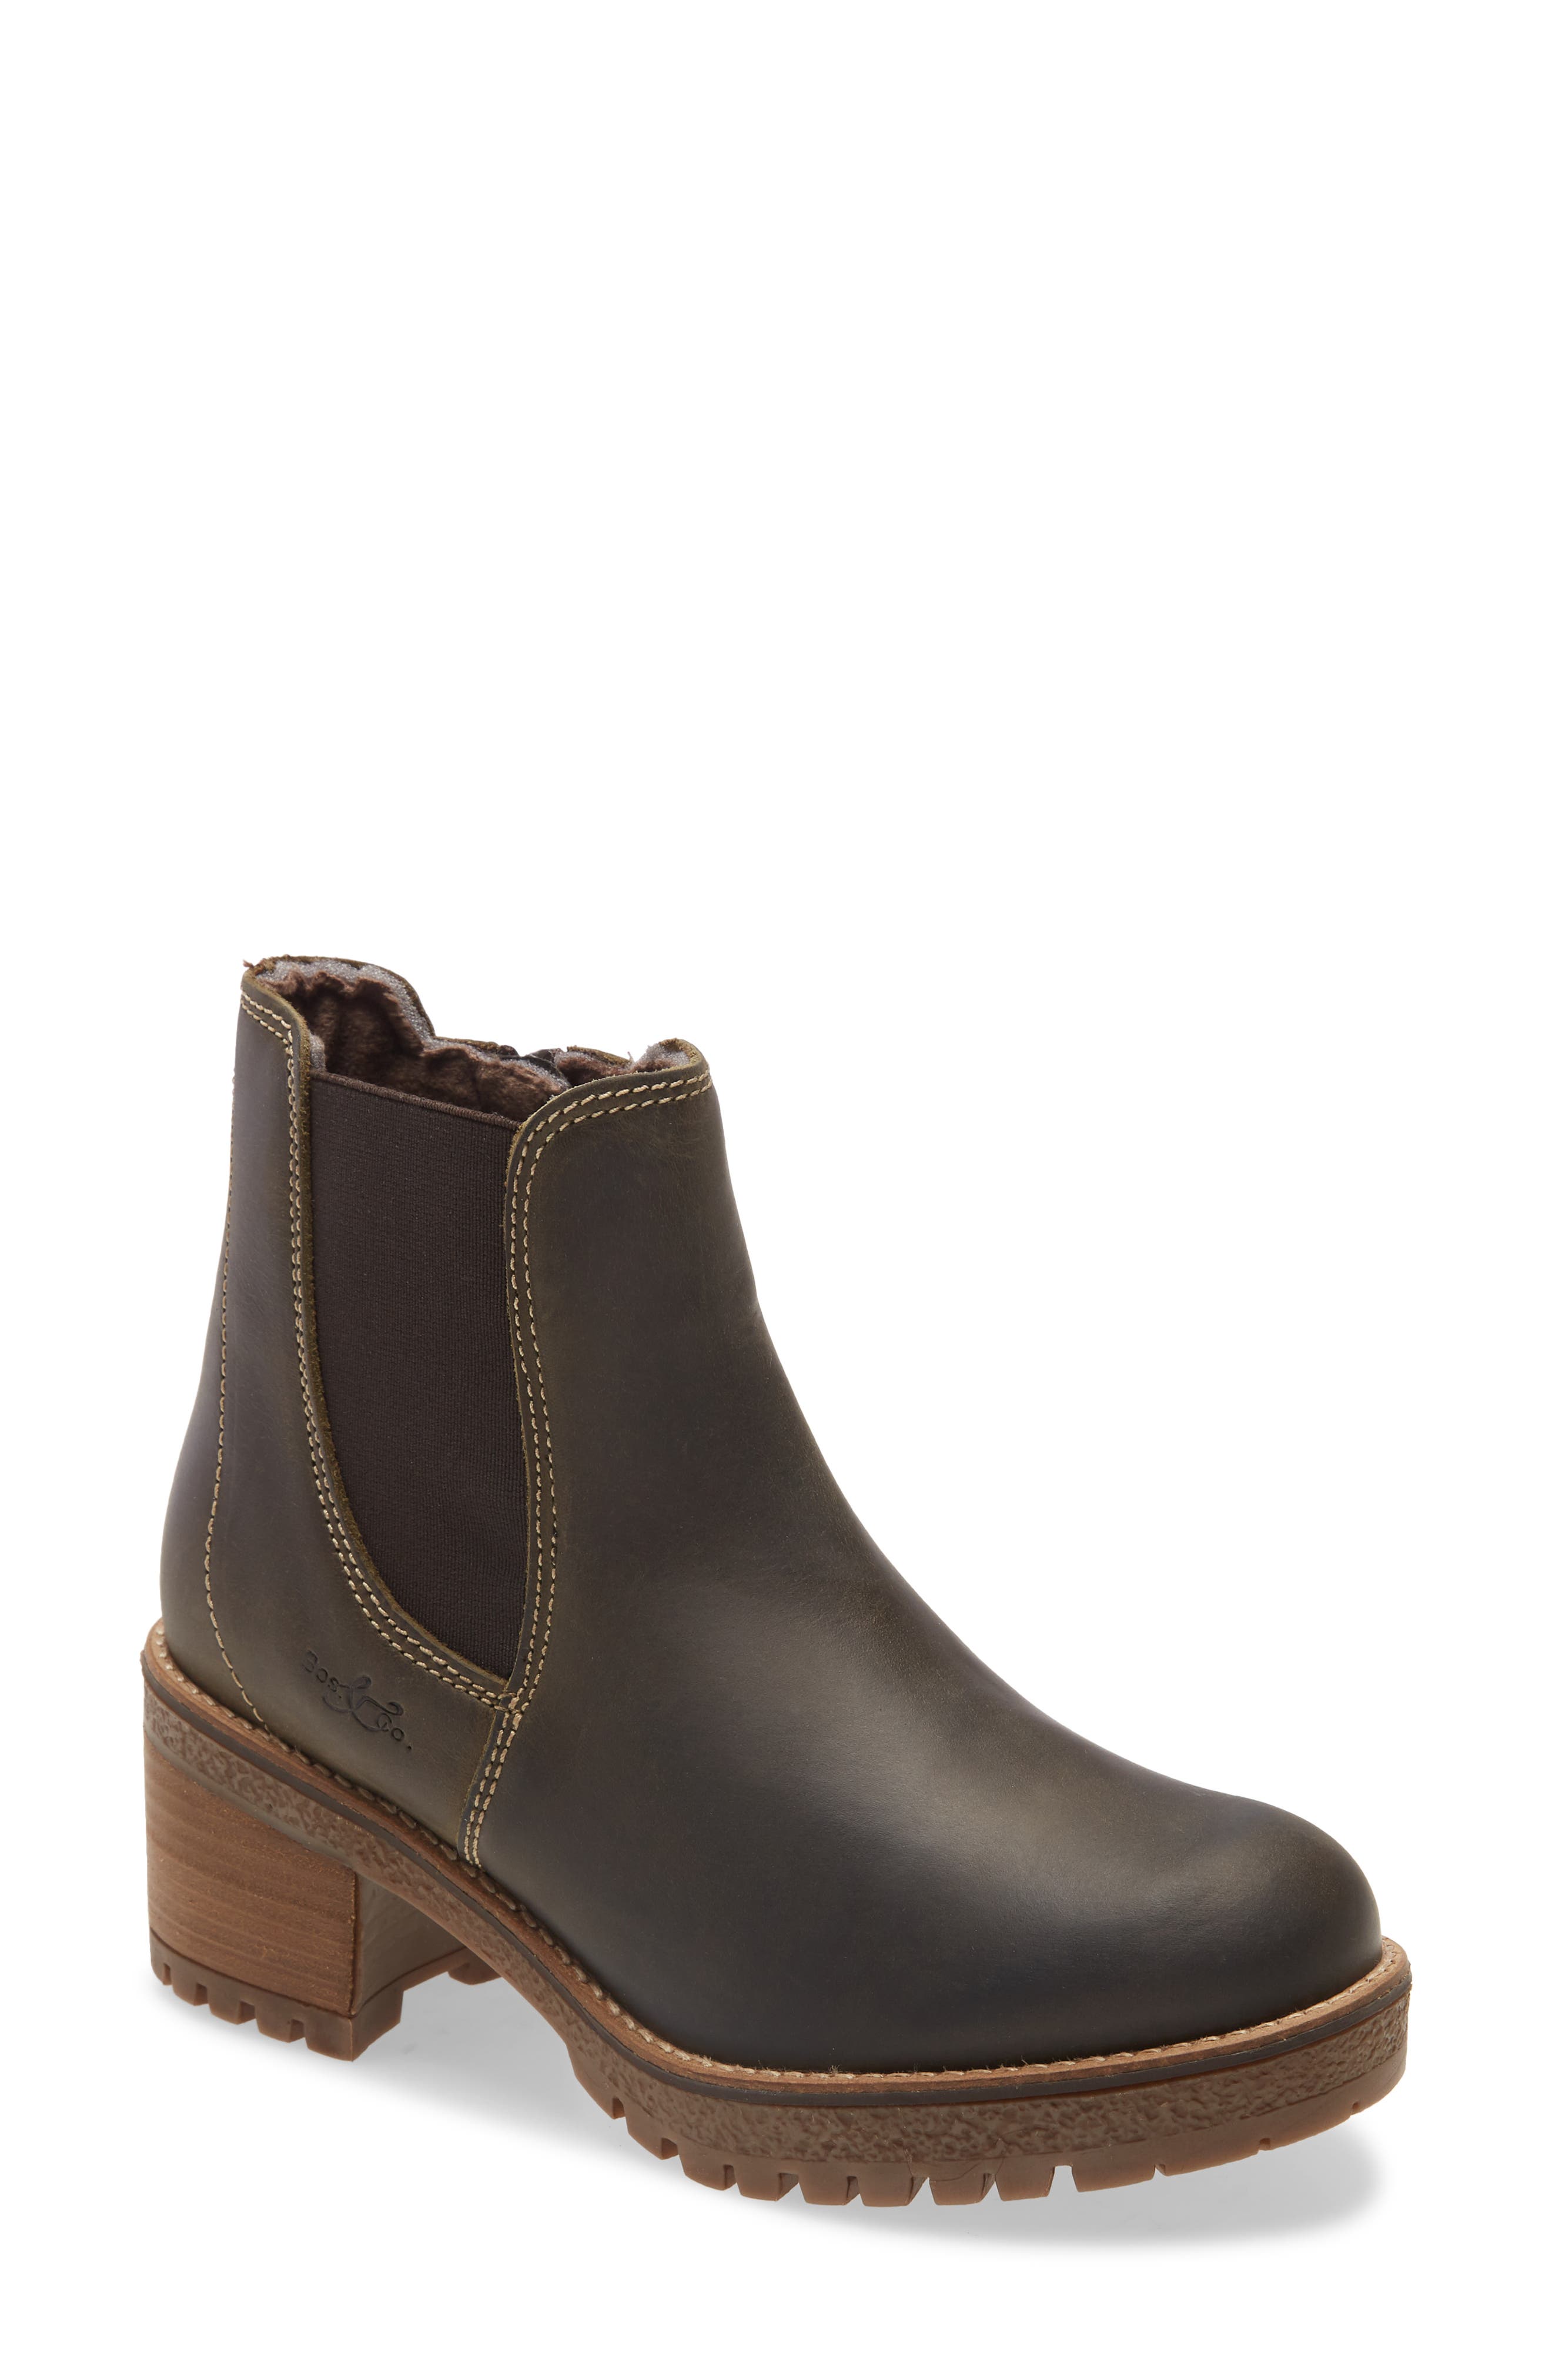 Women's Bos. \u0026 Co. Boots | Nordstrom